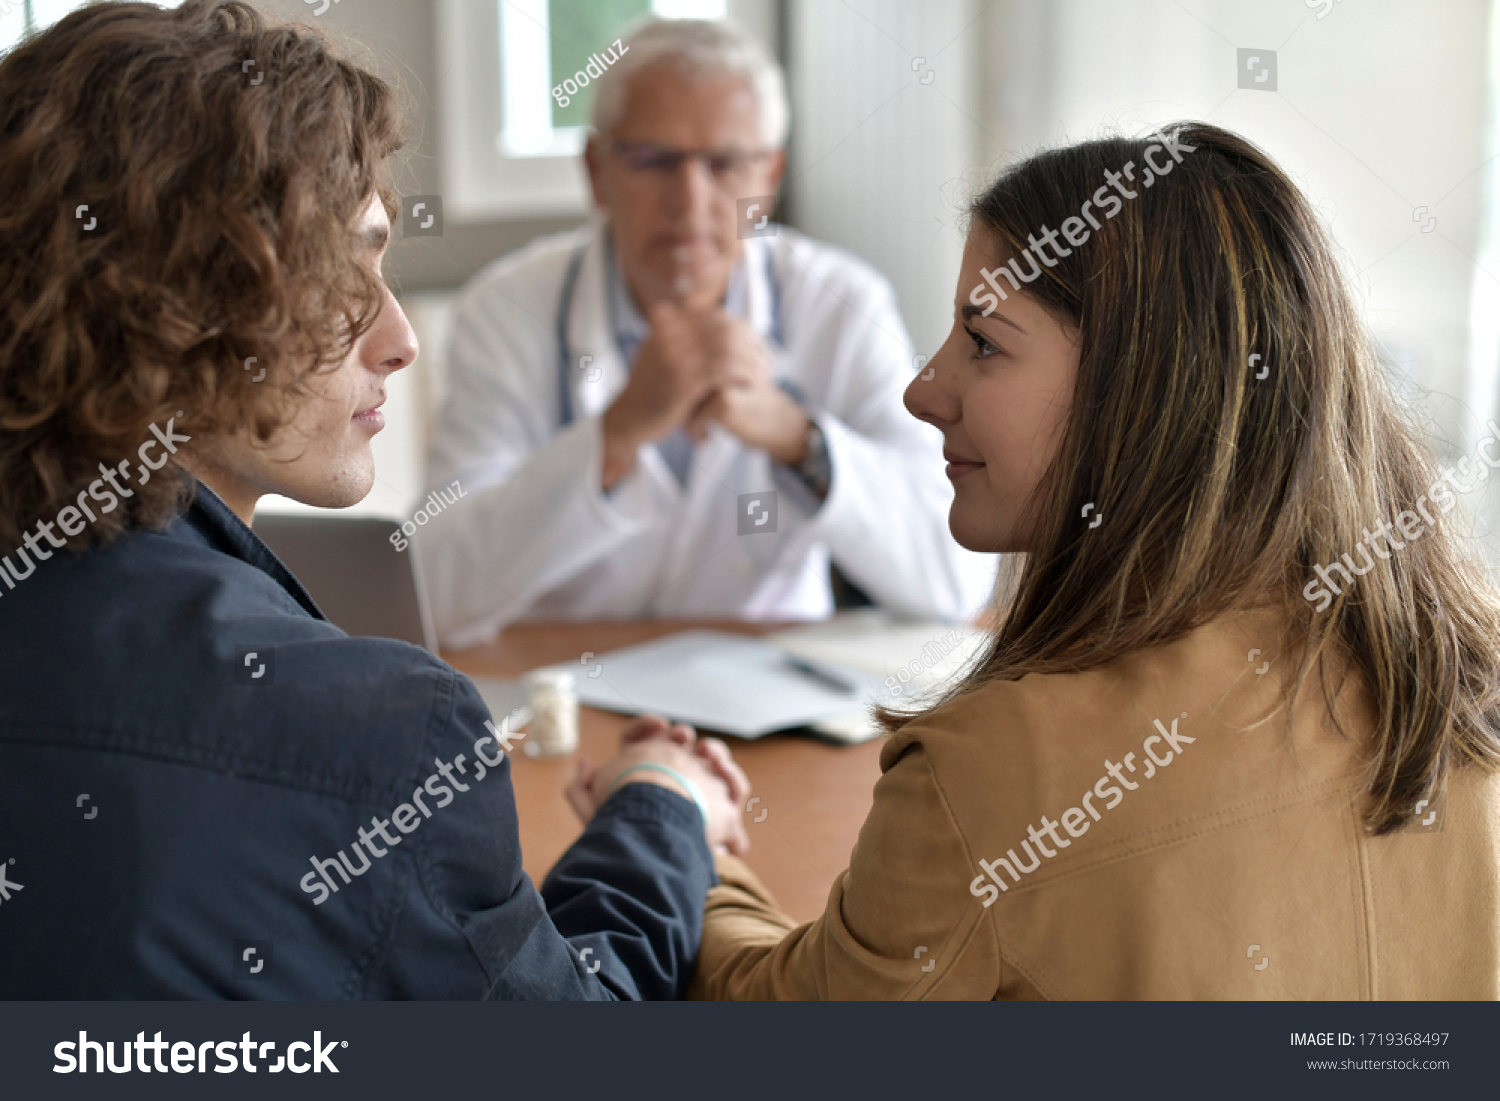 Young couple having an appointment at the doctor's office #1719368497